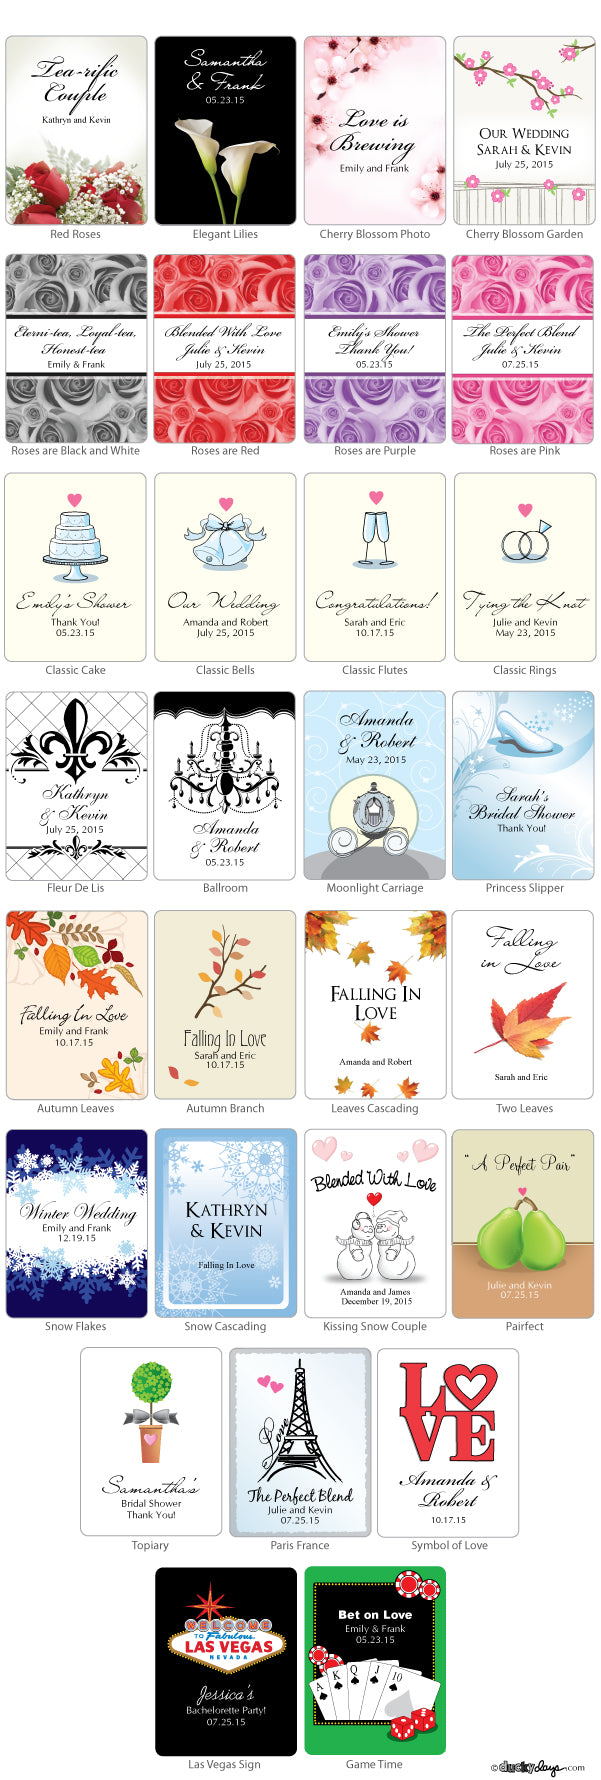 Personalized Wedding Tea Favors (Many Designs Available) - Alternate Image 5 | My Wedding Favors